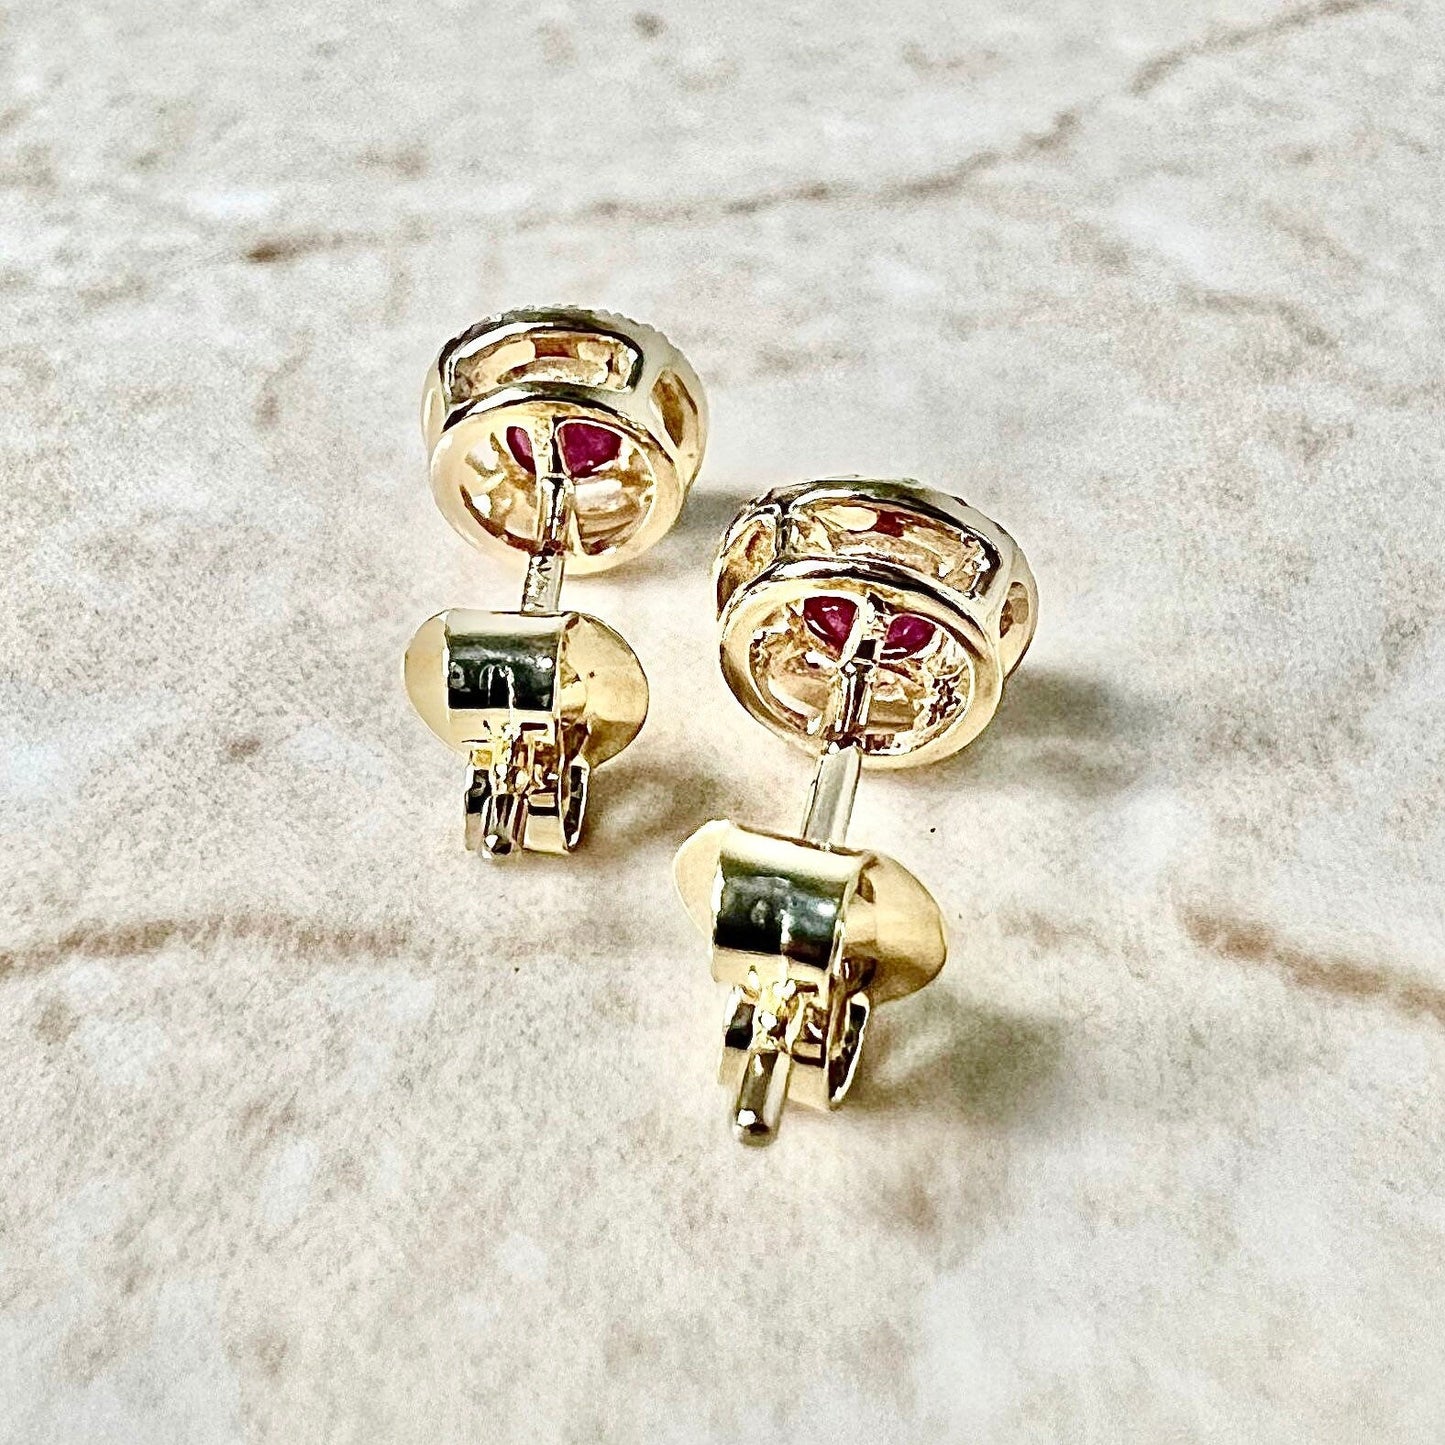 14K Round Ruby Halo Stud Earrings - Yellow Gold Ruby Studs - Gold Ruby Earrings - Genuine Ruby Halo Earrings - Best July Birthstone Gift